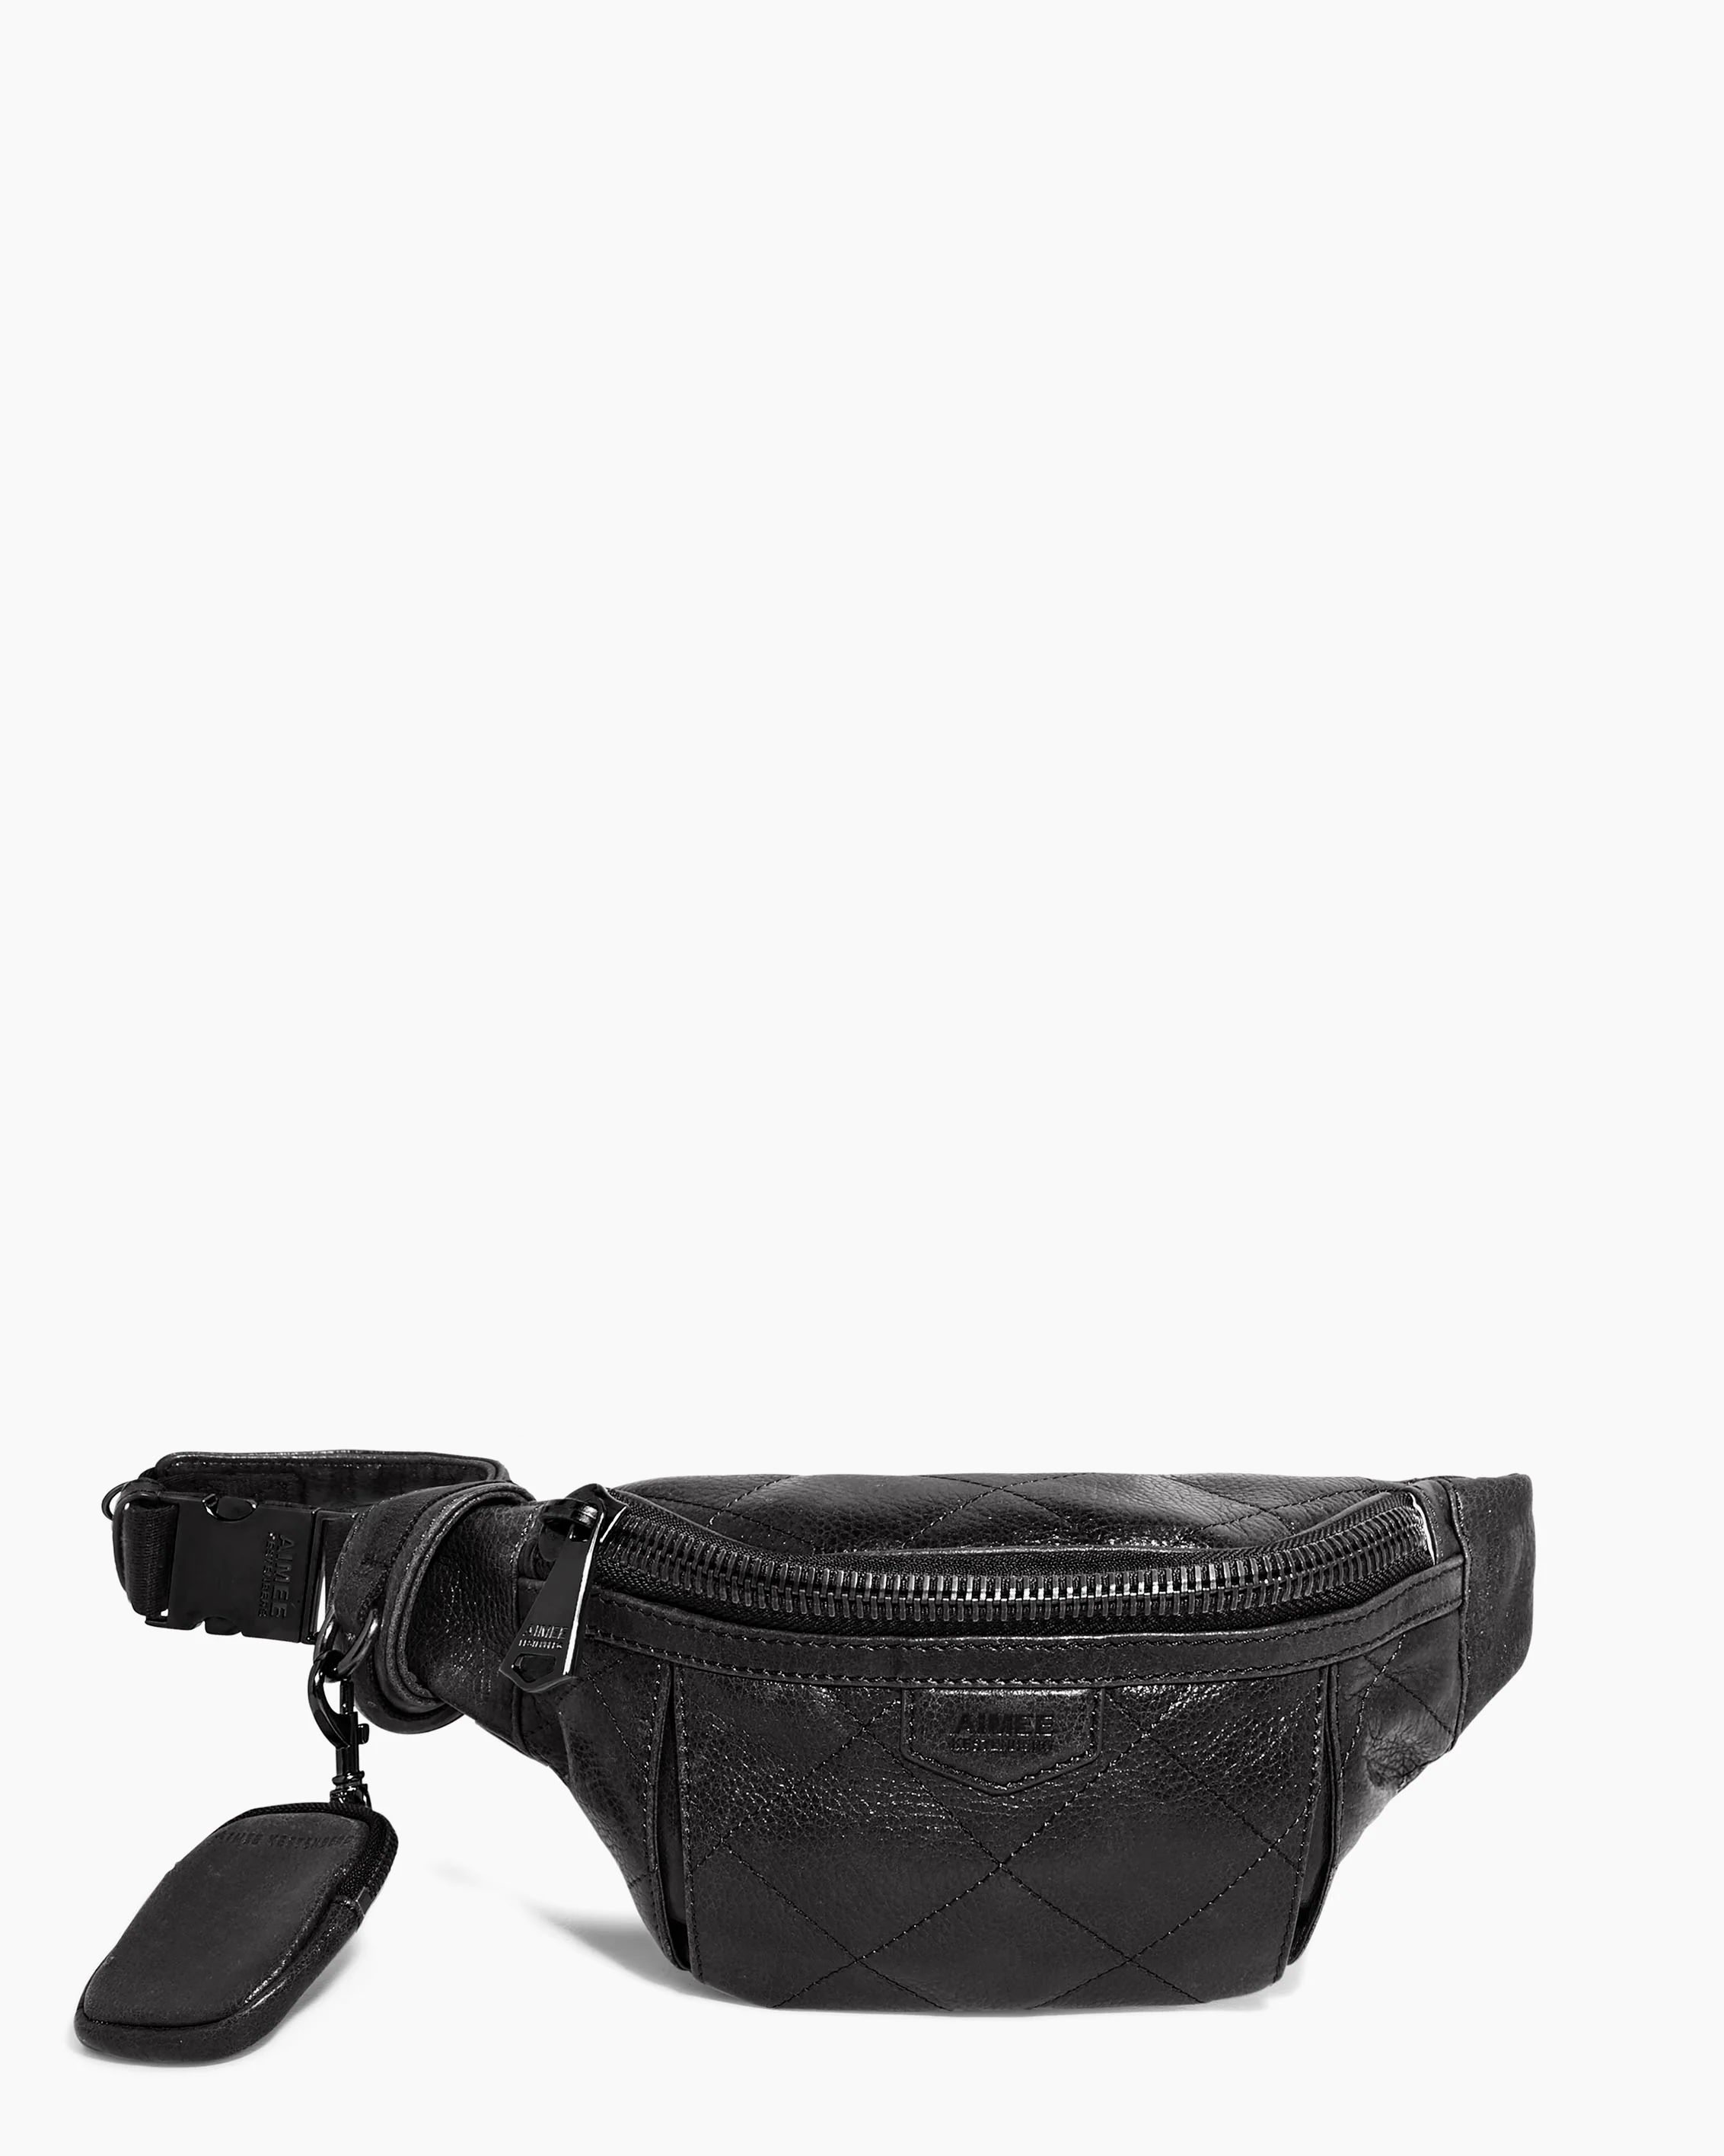 Outta Here Sling Bag with Pods | Aimee Kestenberg